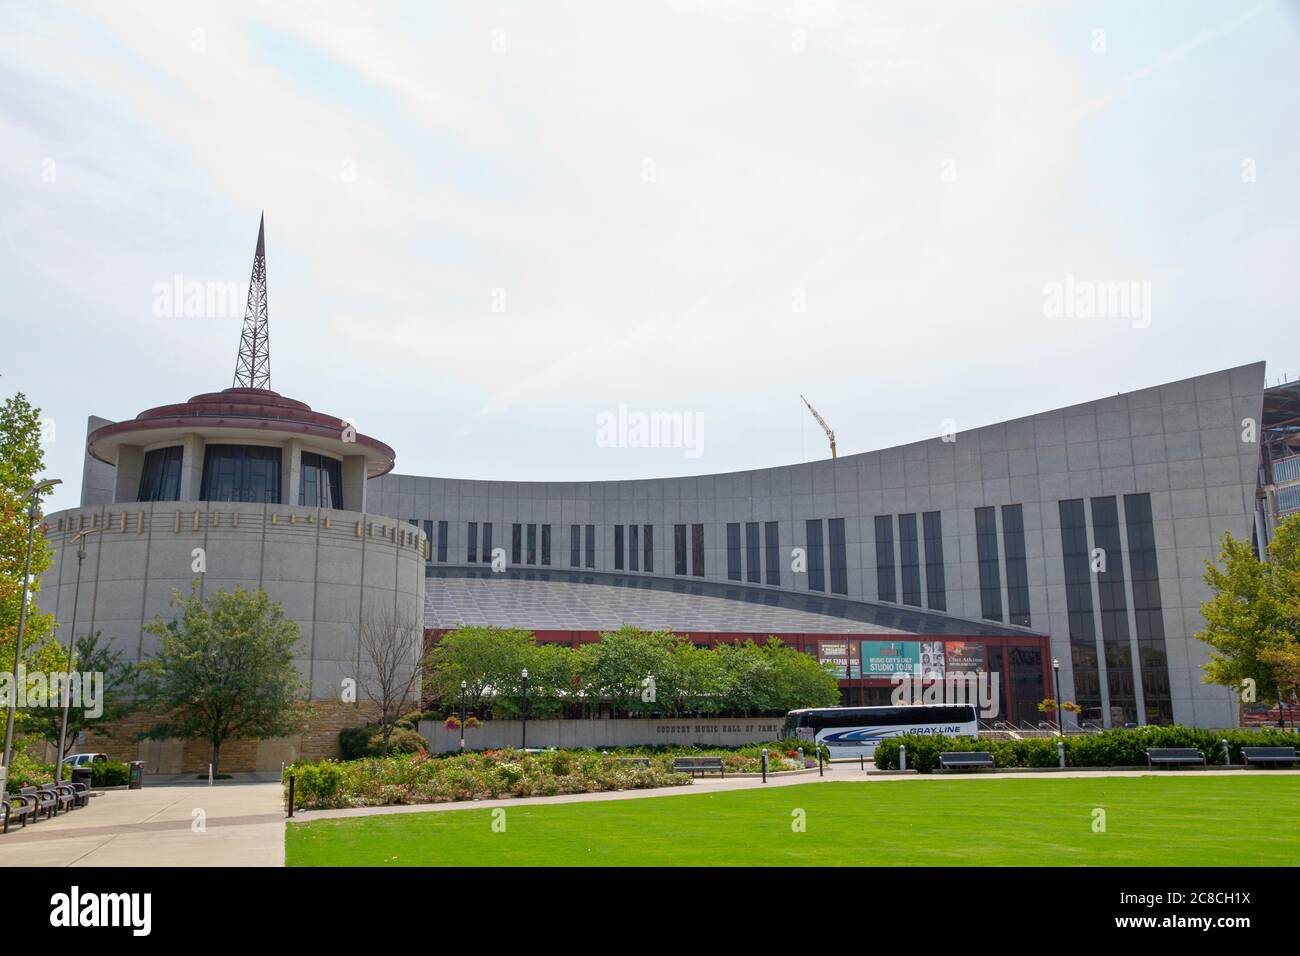 Country Music Hall of Fame and Museum, Nashville, TN, USA Stock Photo